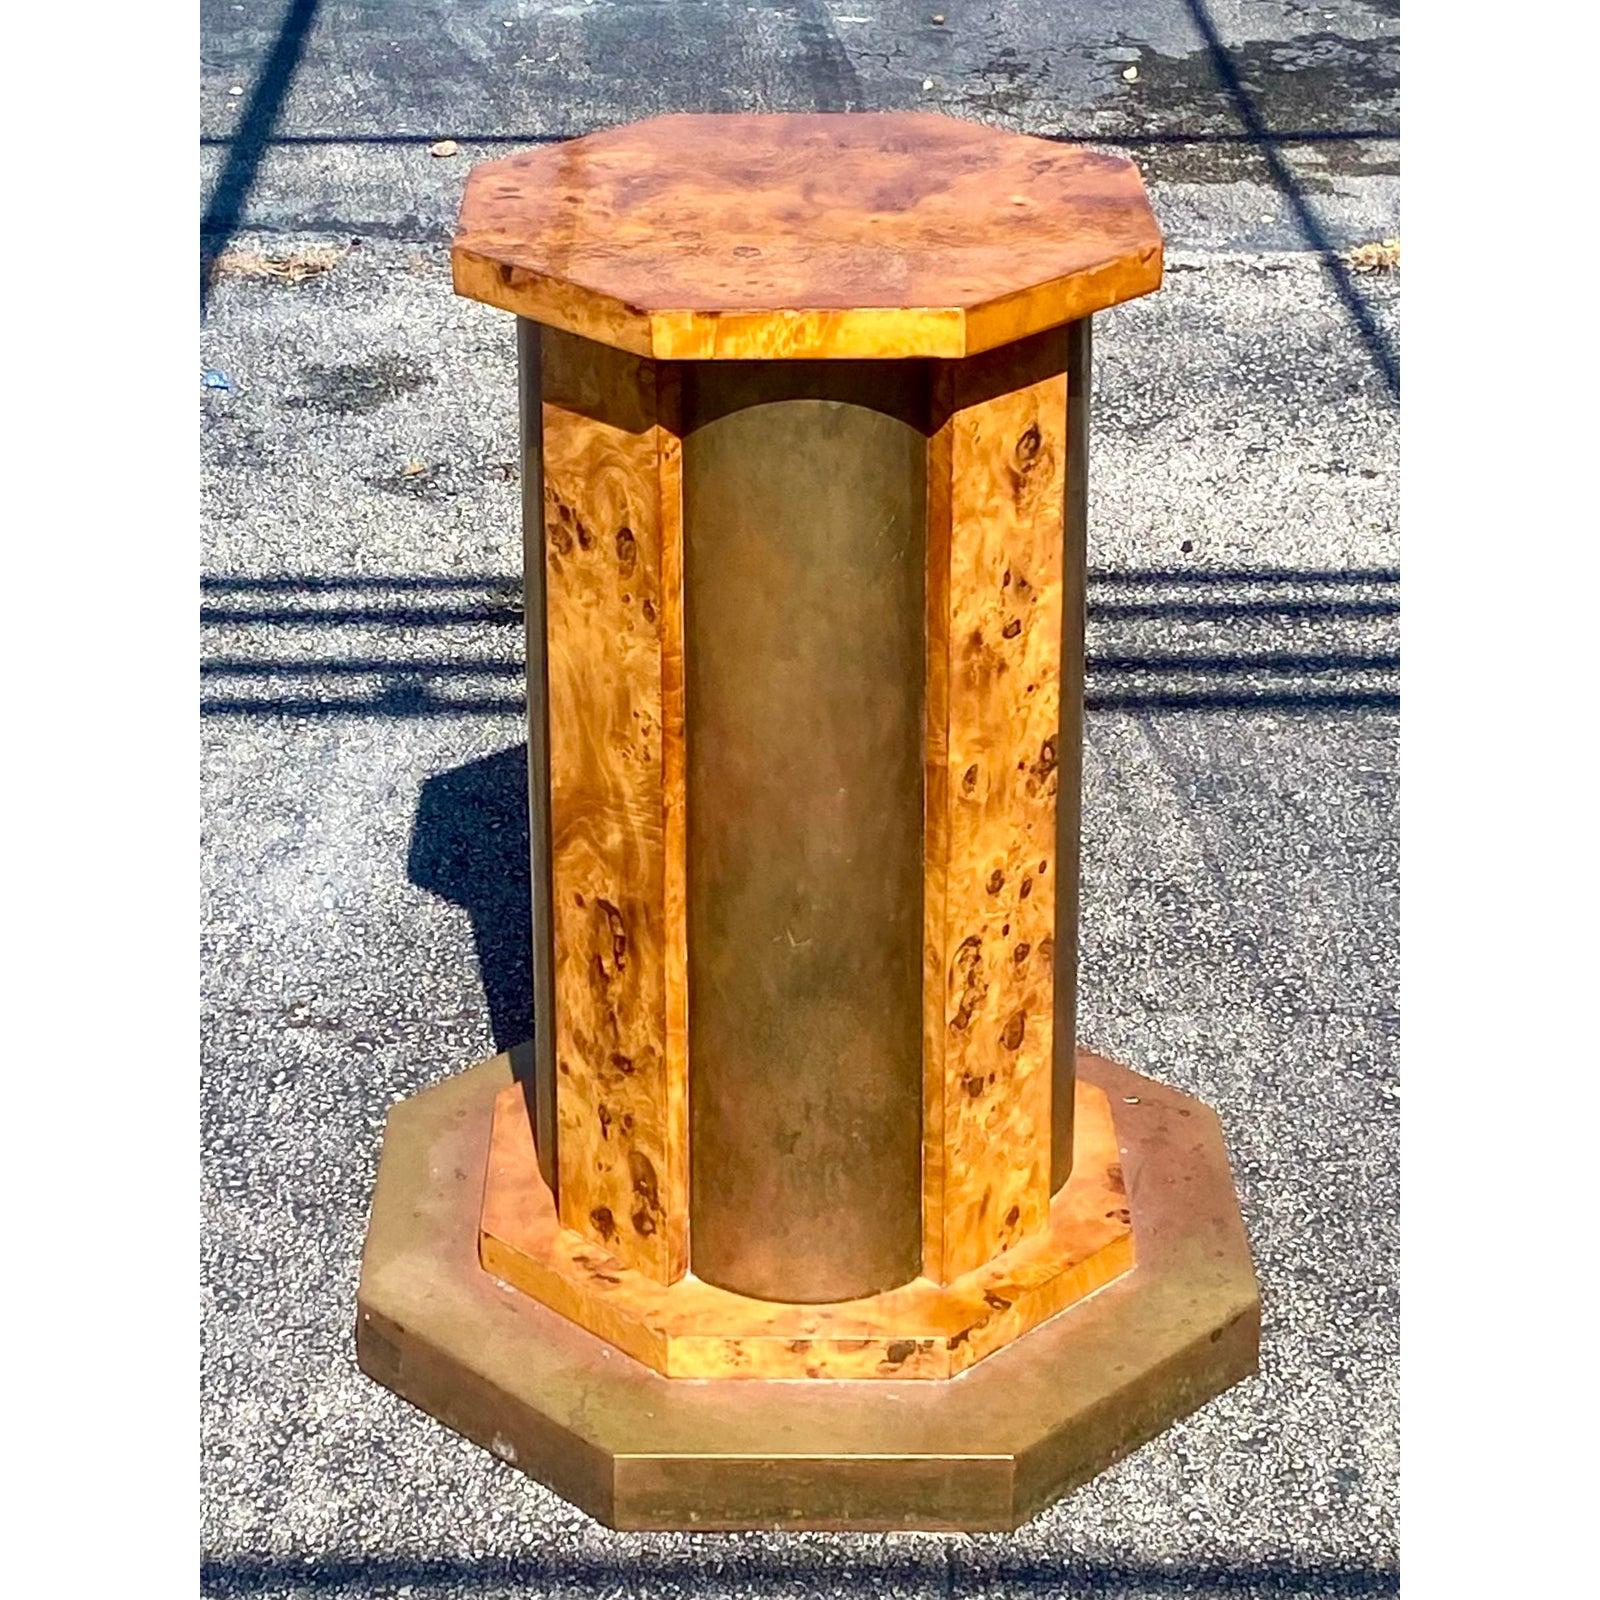 Incredible vintage Tomasso Barbi octagonal table pedestal. Made in Italy with exceptional craftsmanship. Beautiful panels of Burl wood with inset brass panels. Rests on a brass plinth. Perfect for a dining table or card stale. Could even be a great